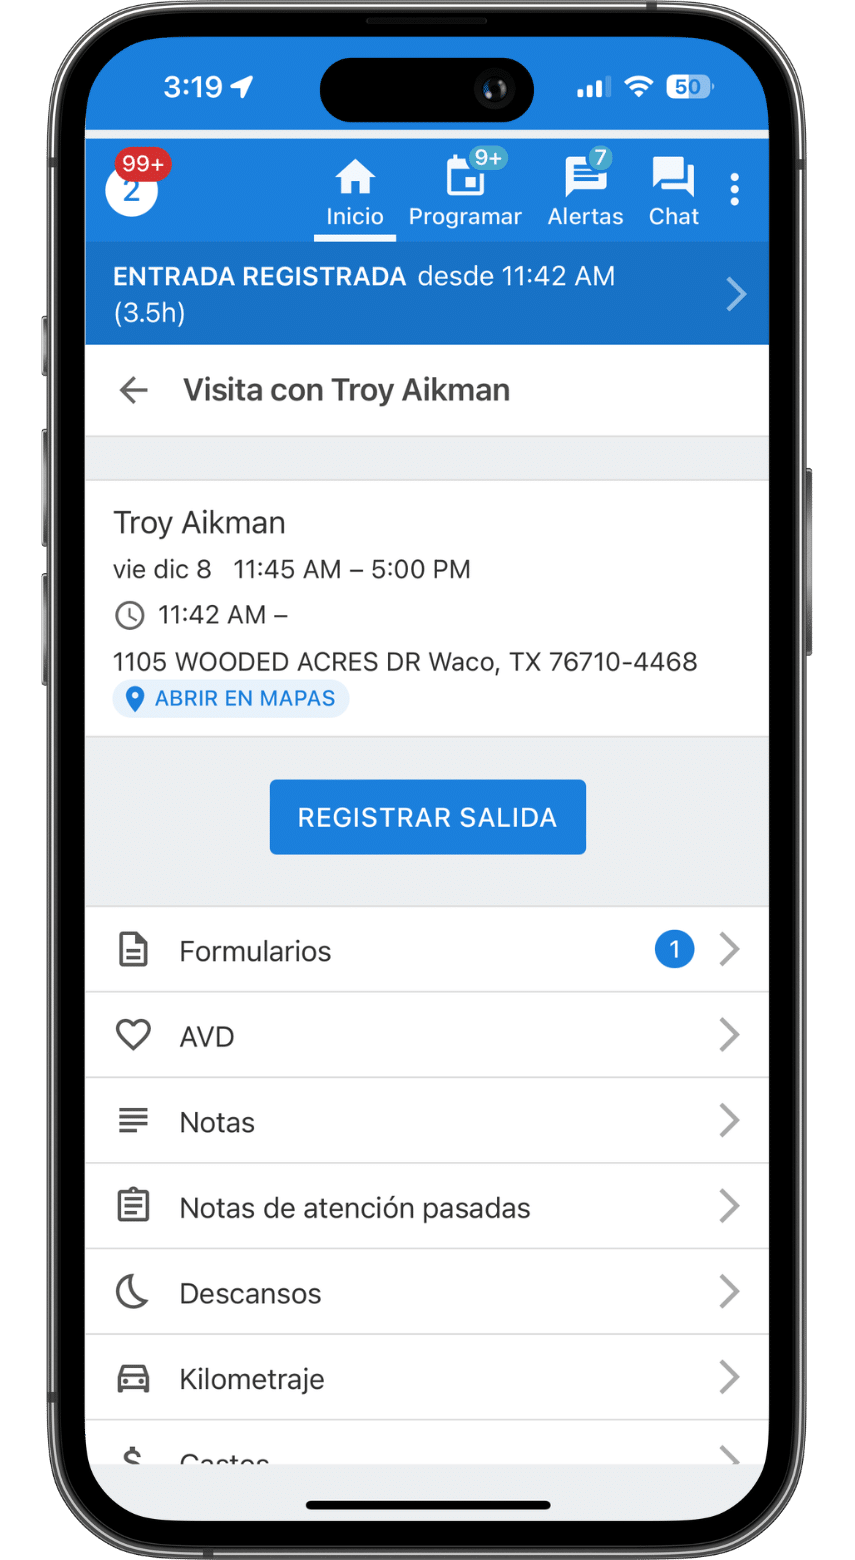 Spanish version of AxisCare mobile app